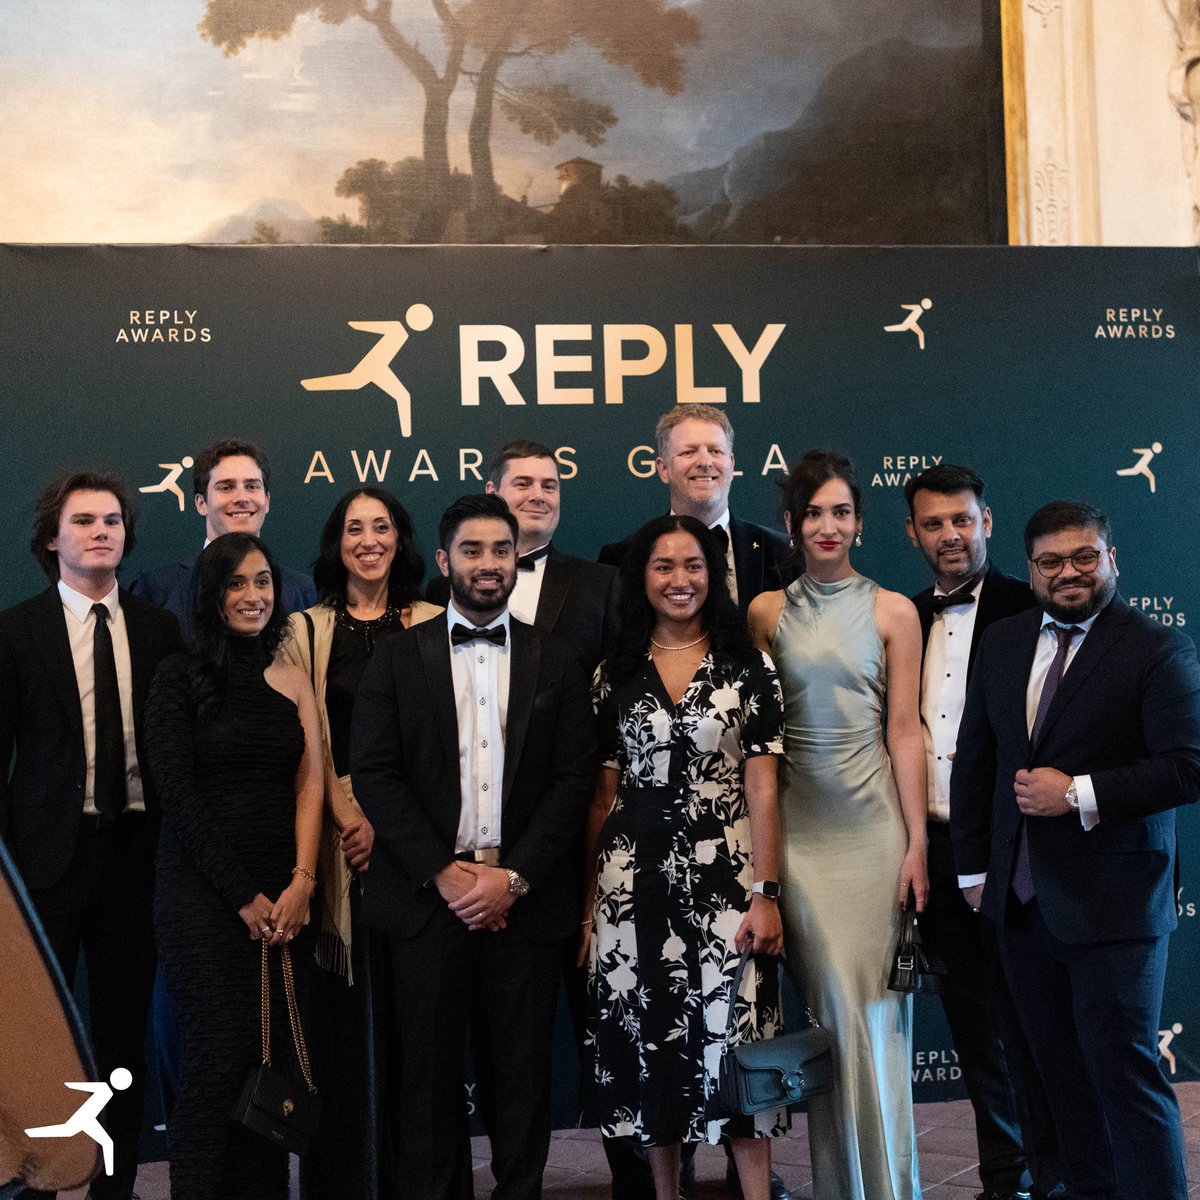 Oh My Gala! ✨ Last week, over 350 distinguished Replyers and their guests convened at the stunning Reggia di Venaria in Turin, Italy, for an unforgettable Reply Awards Gala: a night of excellence... and elegance! The Reply Awards are all about celebrating the finest projects